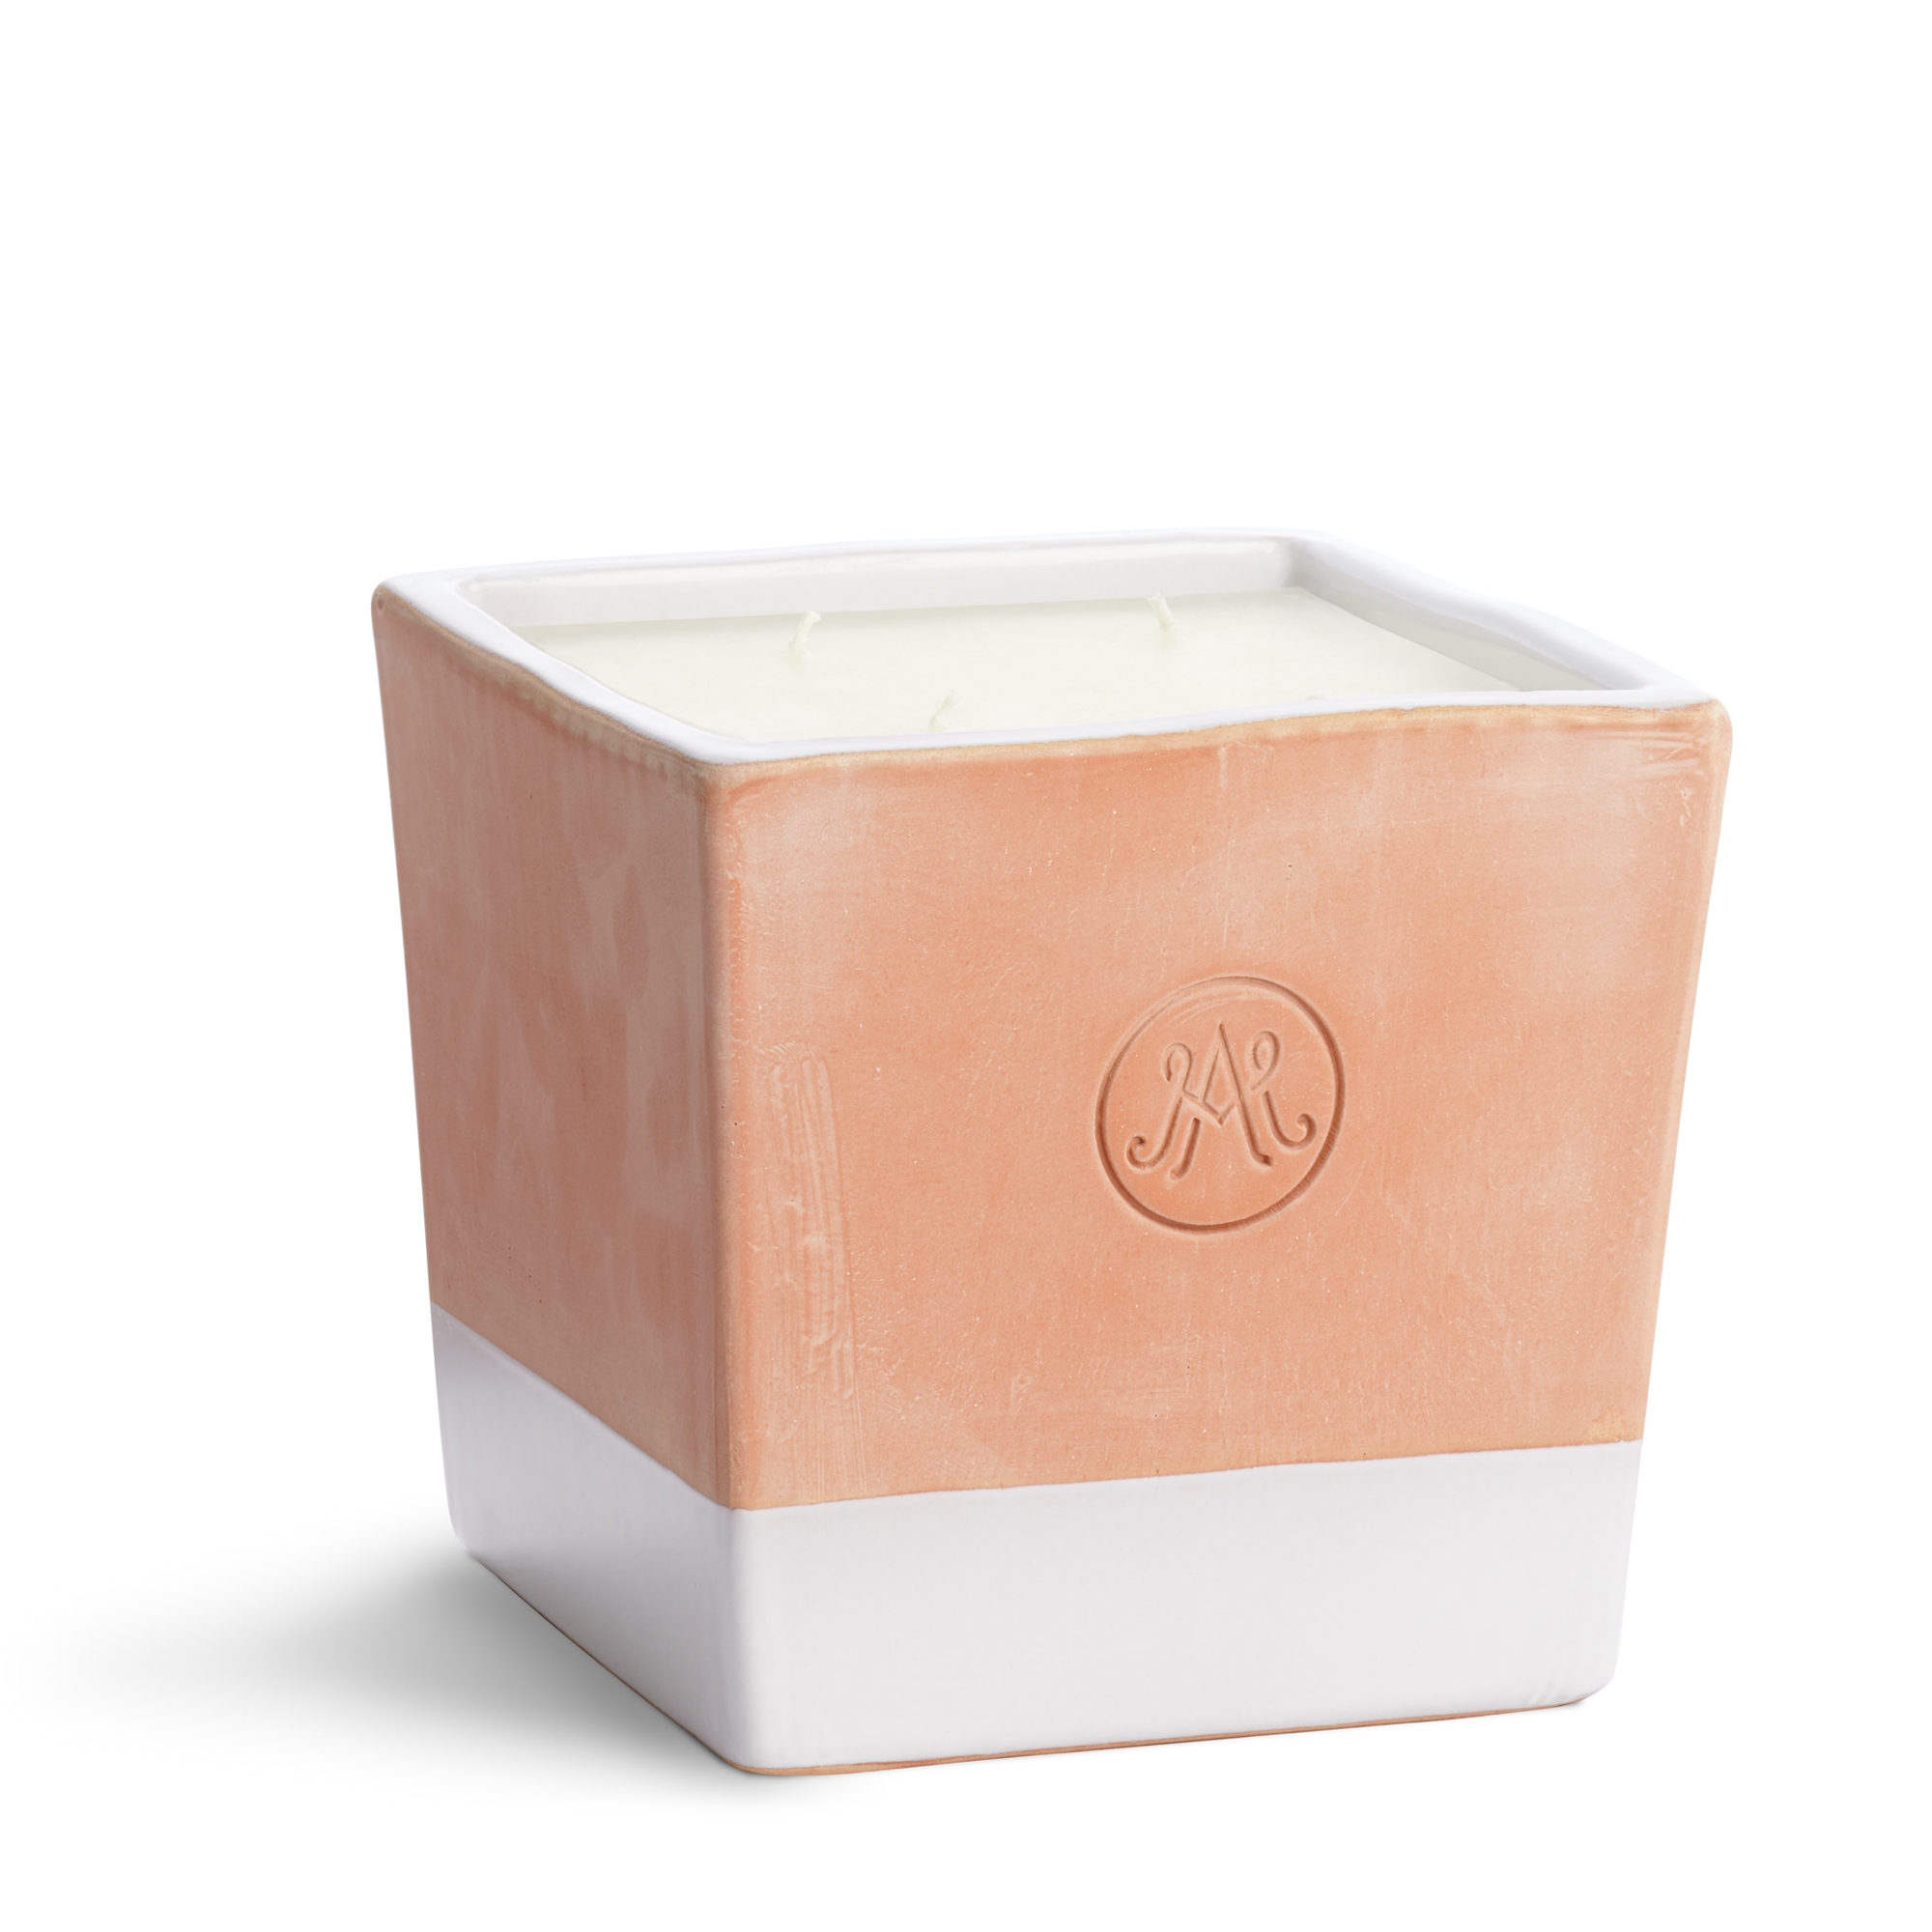 Outdoor Candle in a refillable terracotta and white enamel vessel, scented with lemon zest, tangerine, fresh mint, basil, and a hint of coriander.